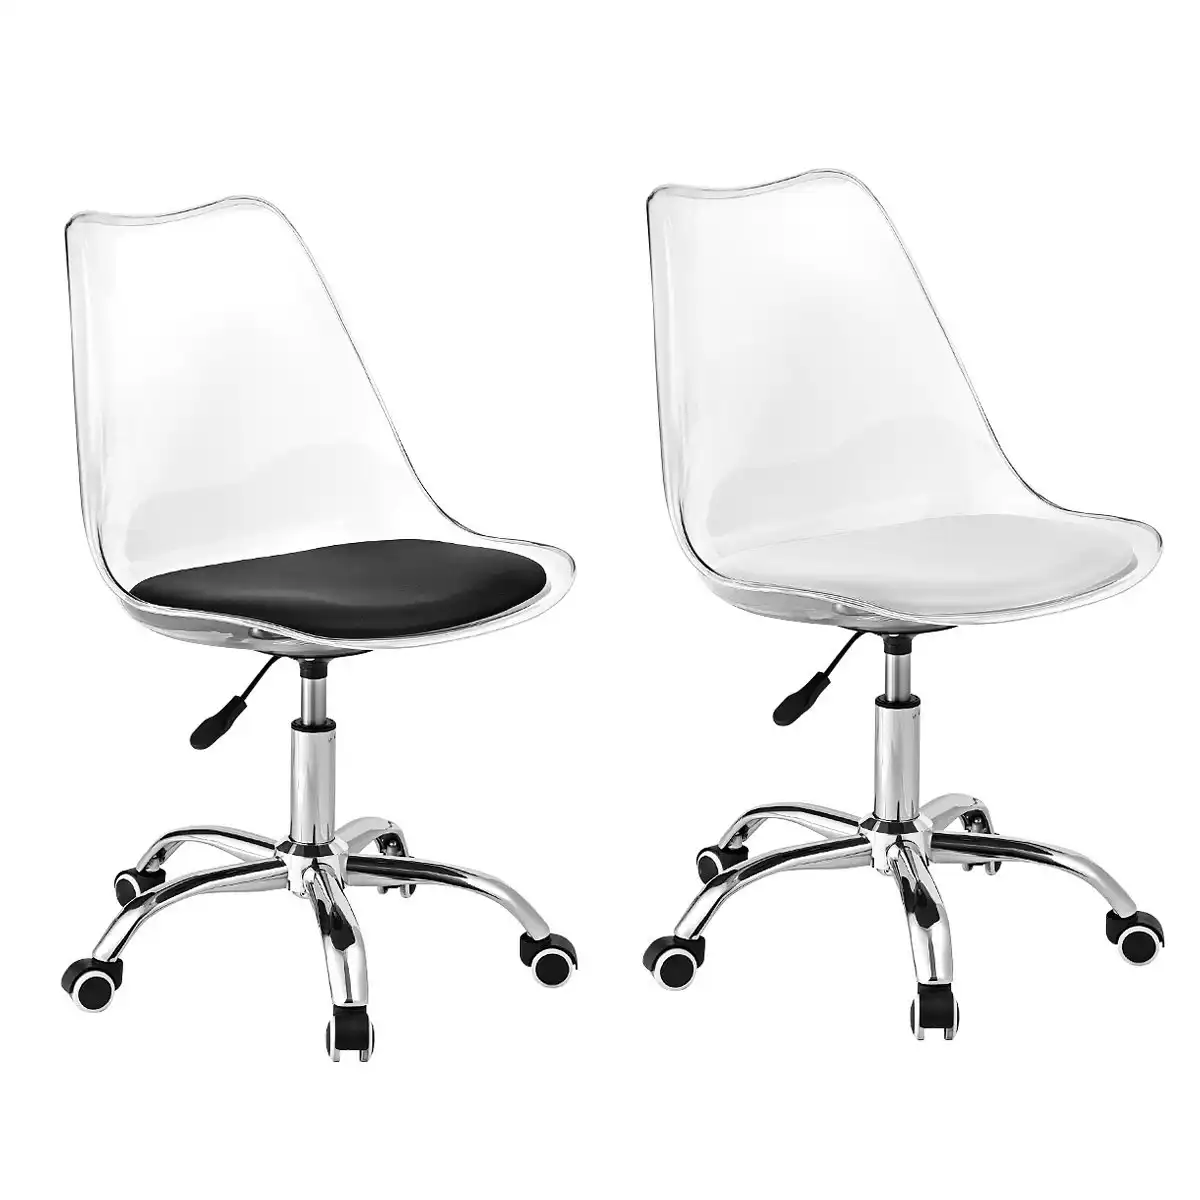 Furb Acrylic Office Chair Height Adjustable Swivel Rolling Stools for Home